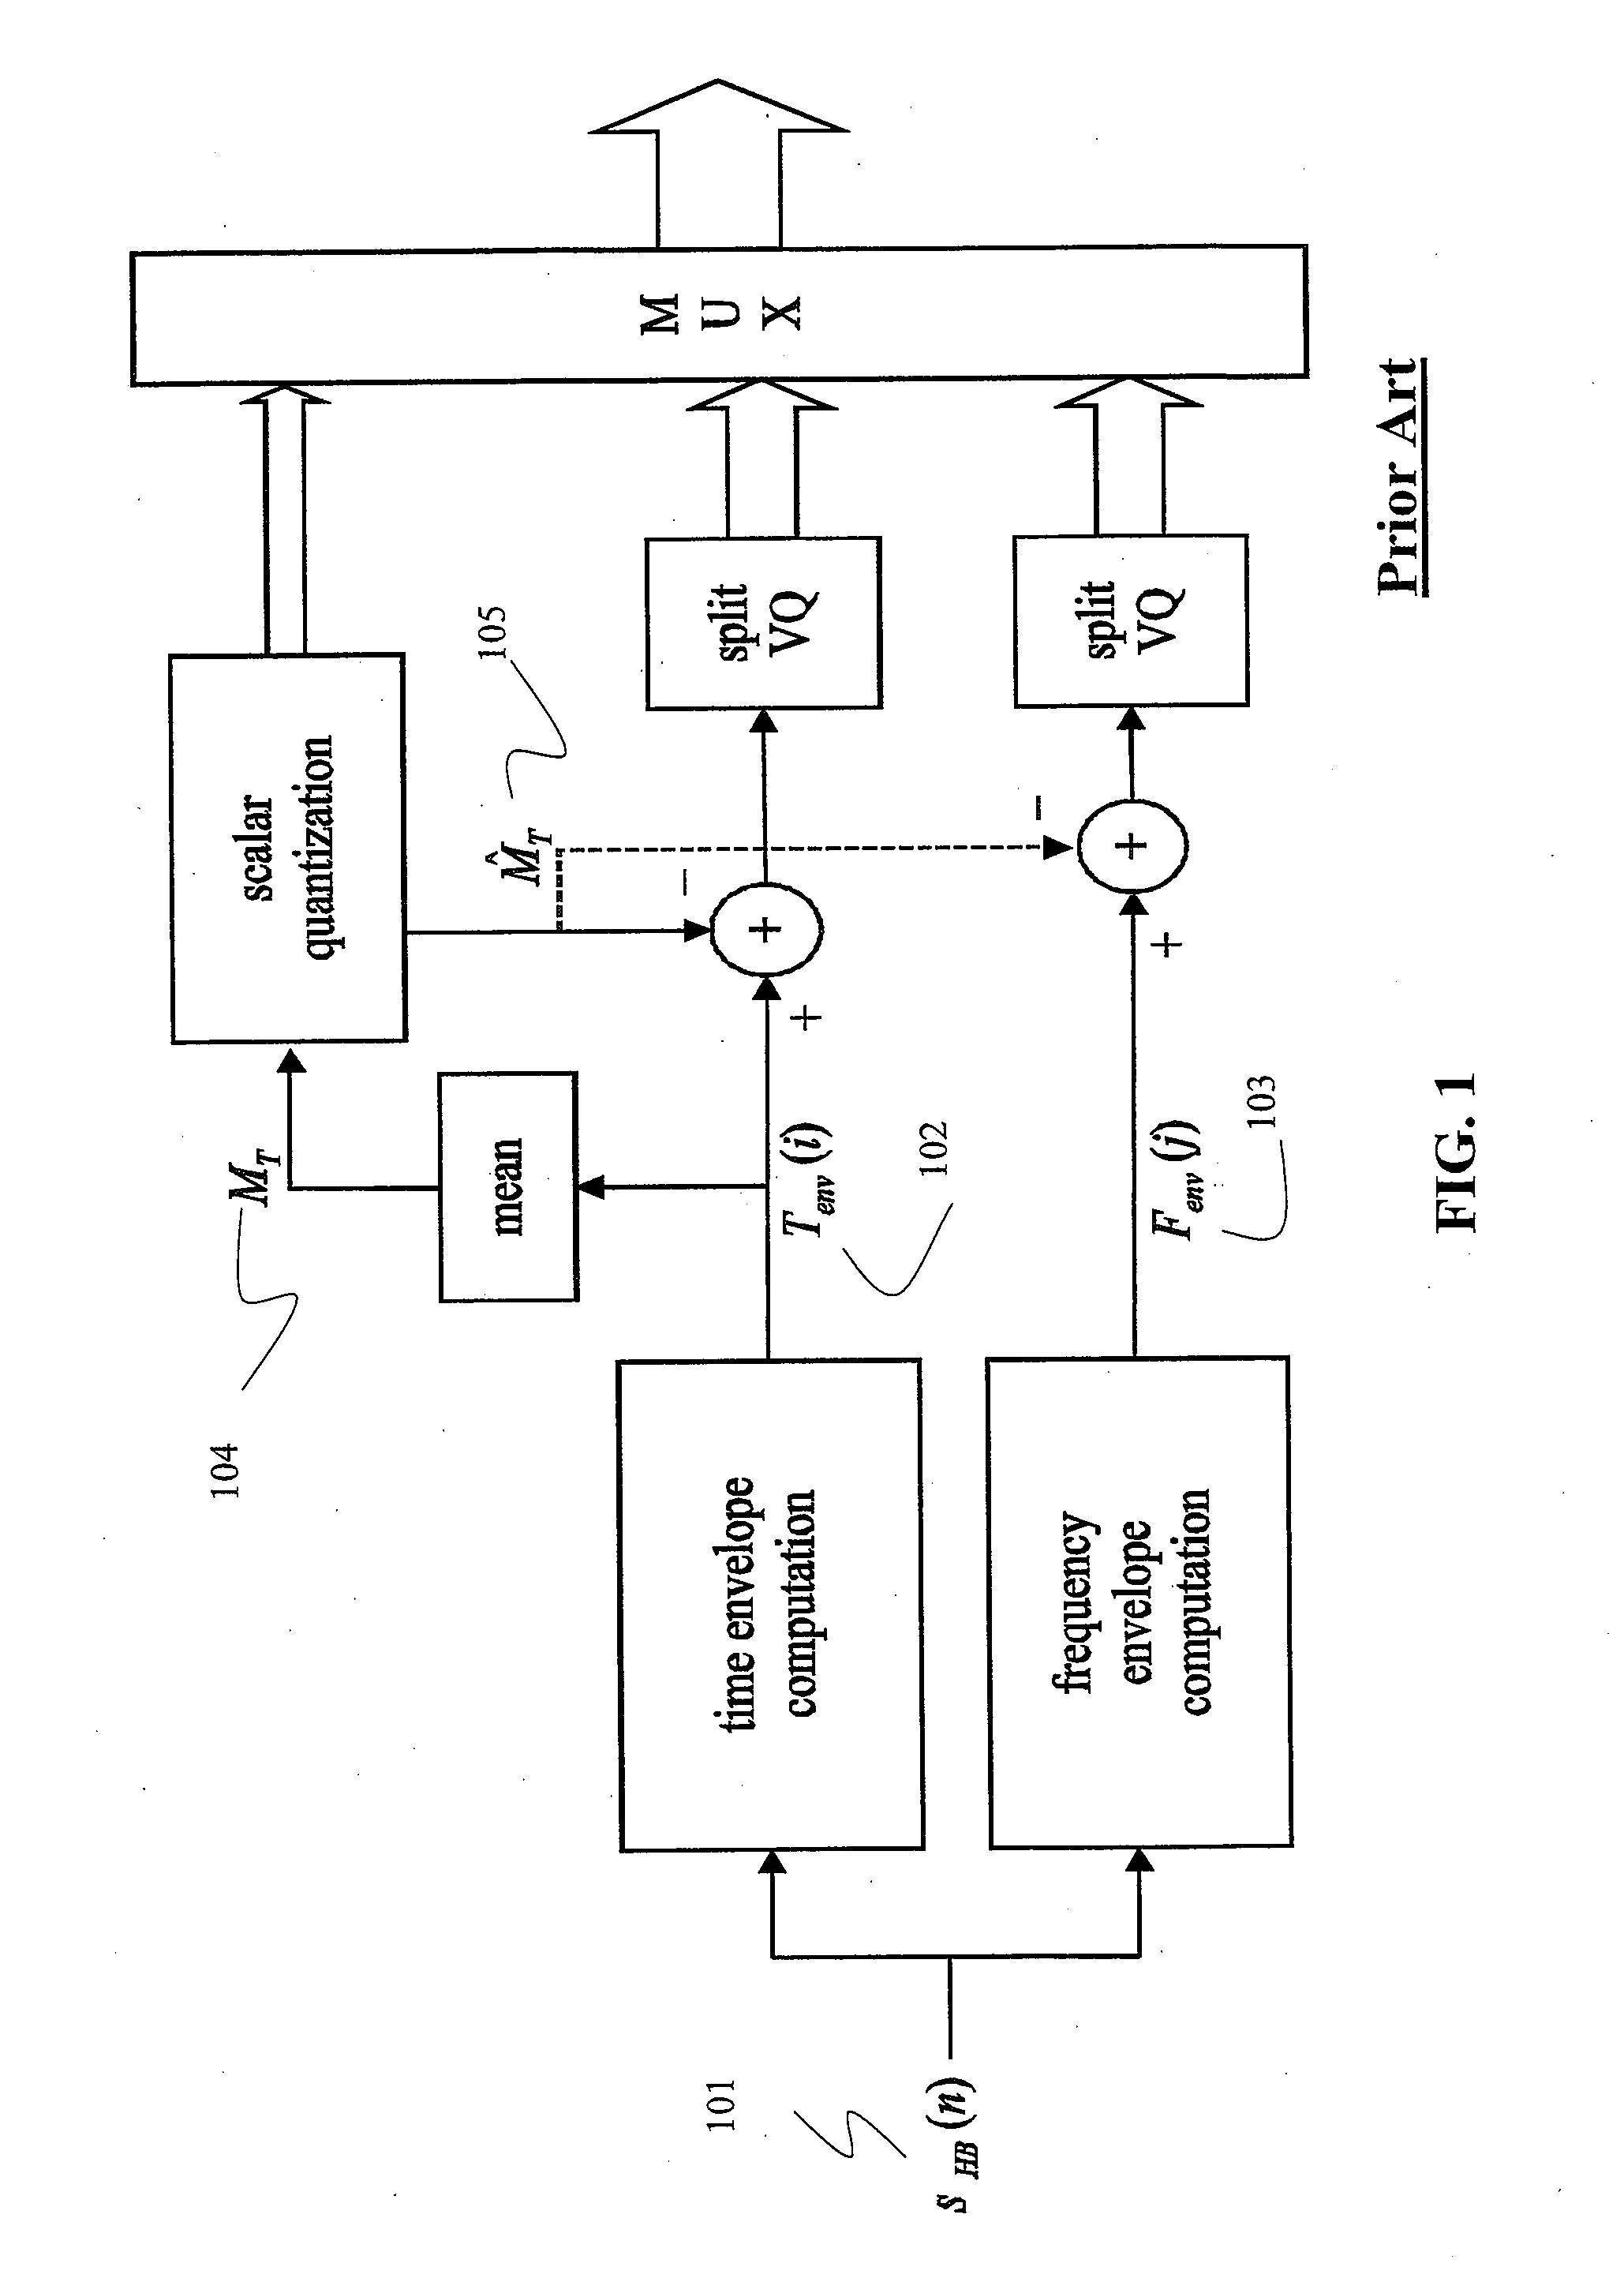 System and Method for Correcting for Lost Data in a Digital Audio Signal